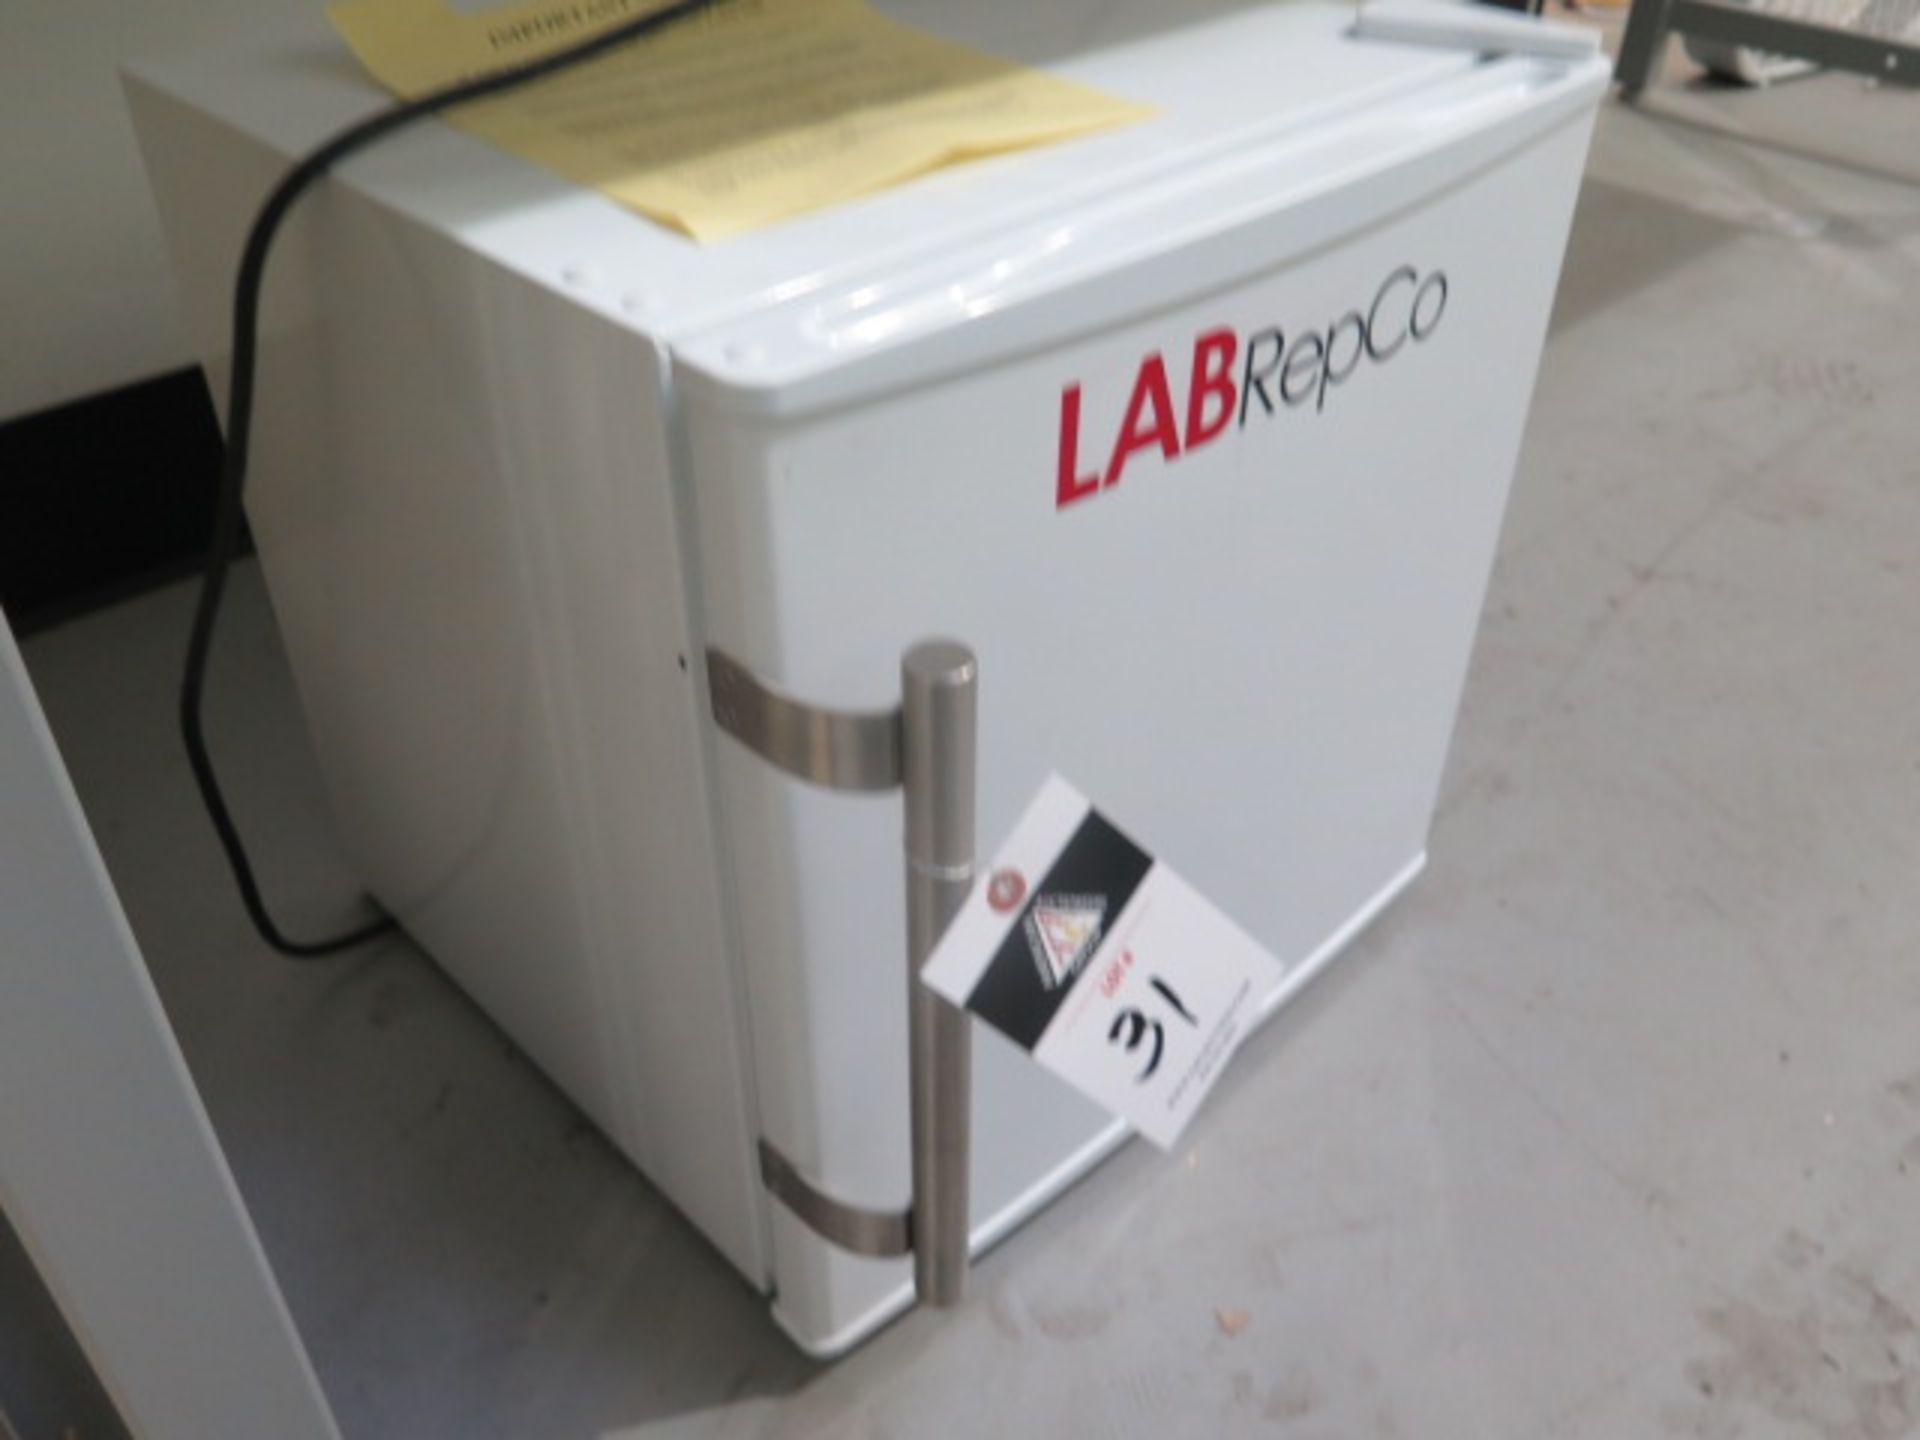 LabRepCo mdl. LH-2-FM Lab Refrigerator (SOLD AS-IS - NO WARRANTY) - Image 2 of 4